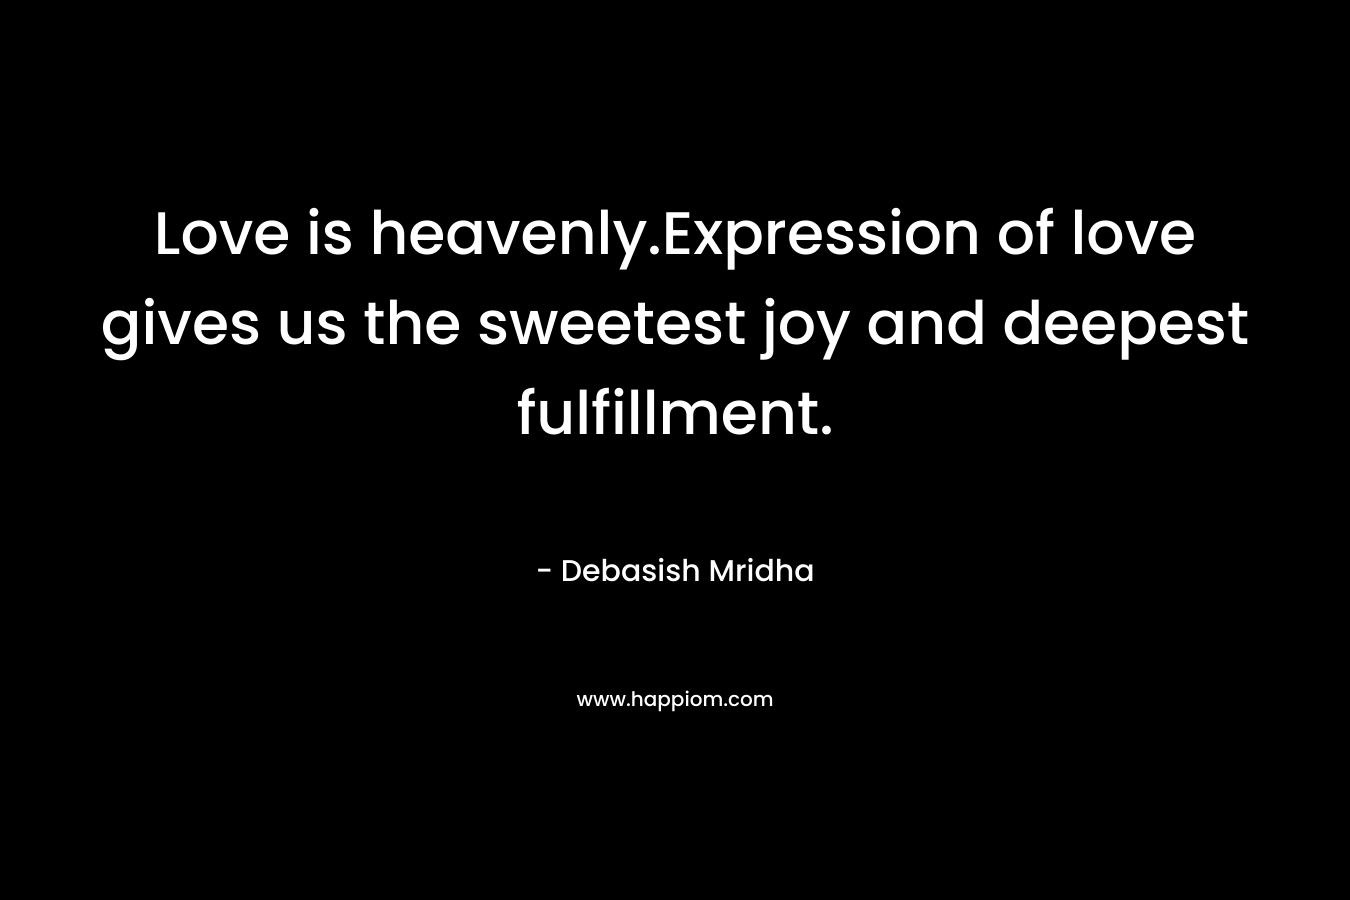 Love is heavenly.Expression of love gives us the sweetest joy and deepest fulfillment.